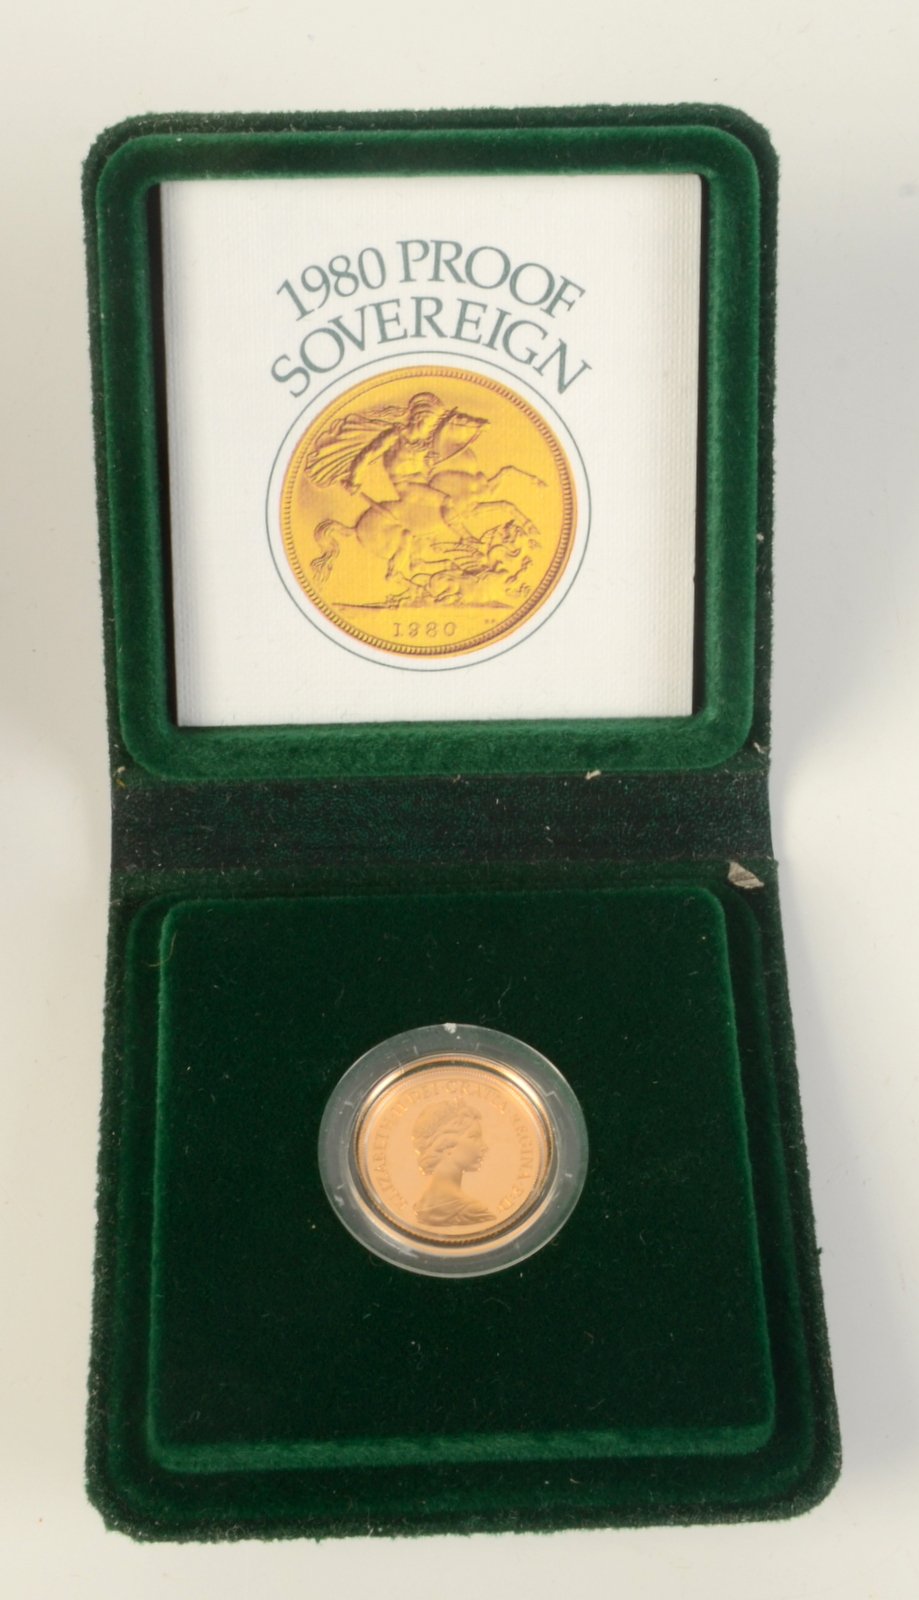 A 1980 proof sovereign in original case and packaging.